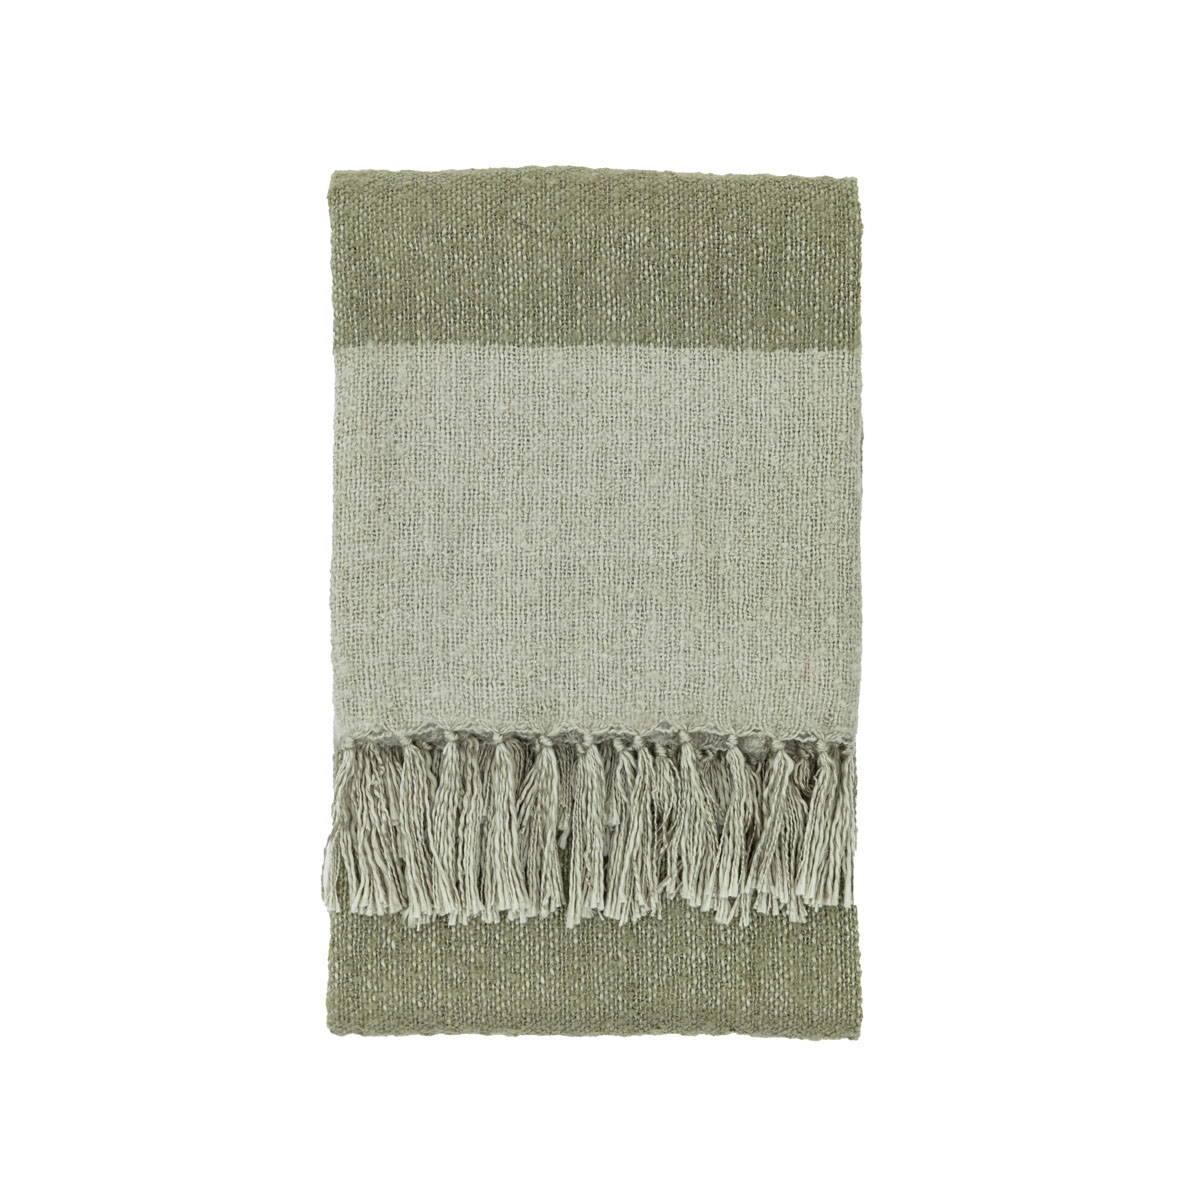 Stripe Faux Mohair Throw Olive 1300x1800mm